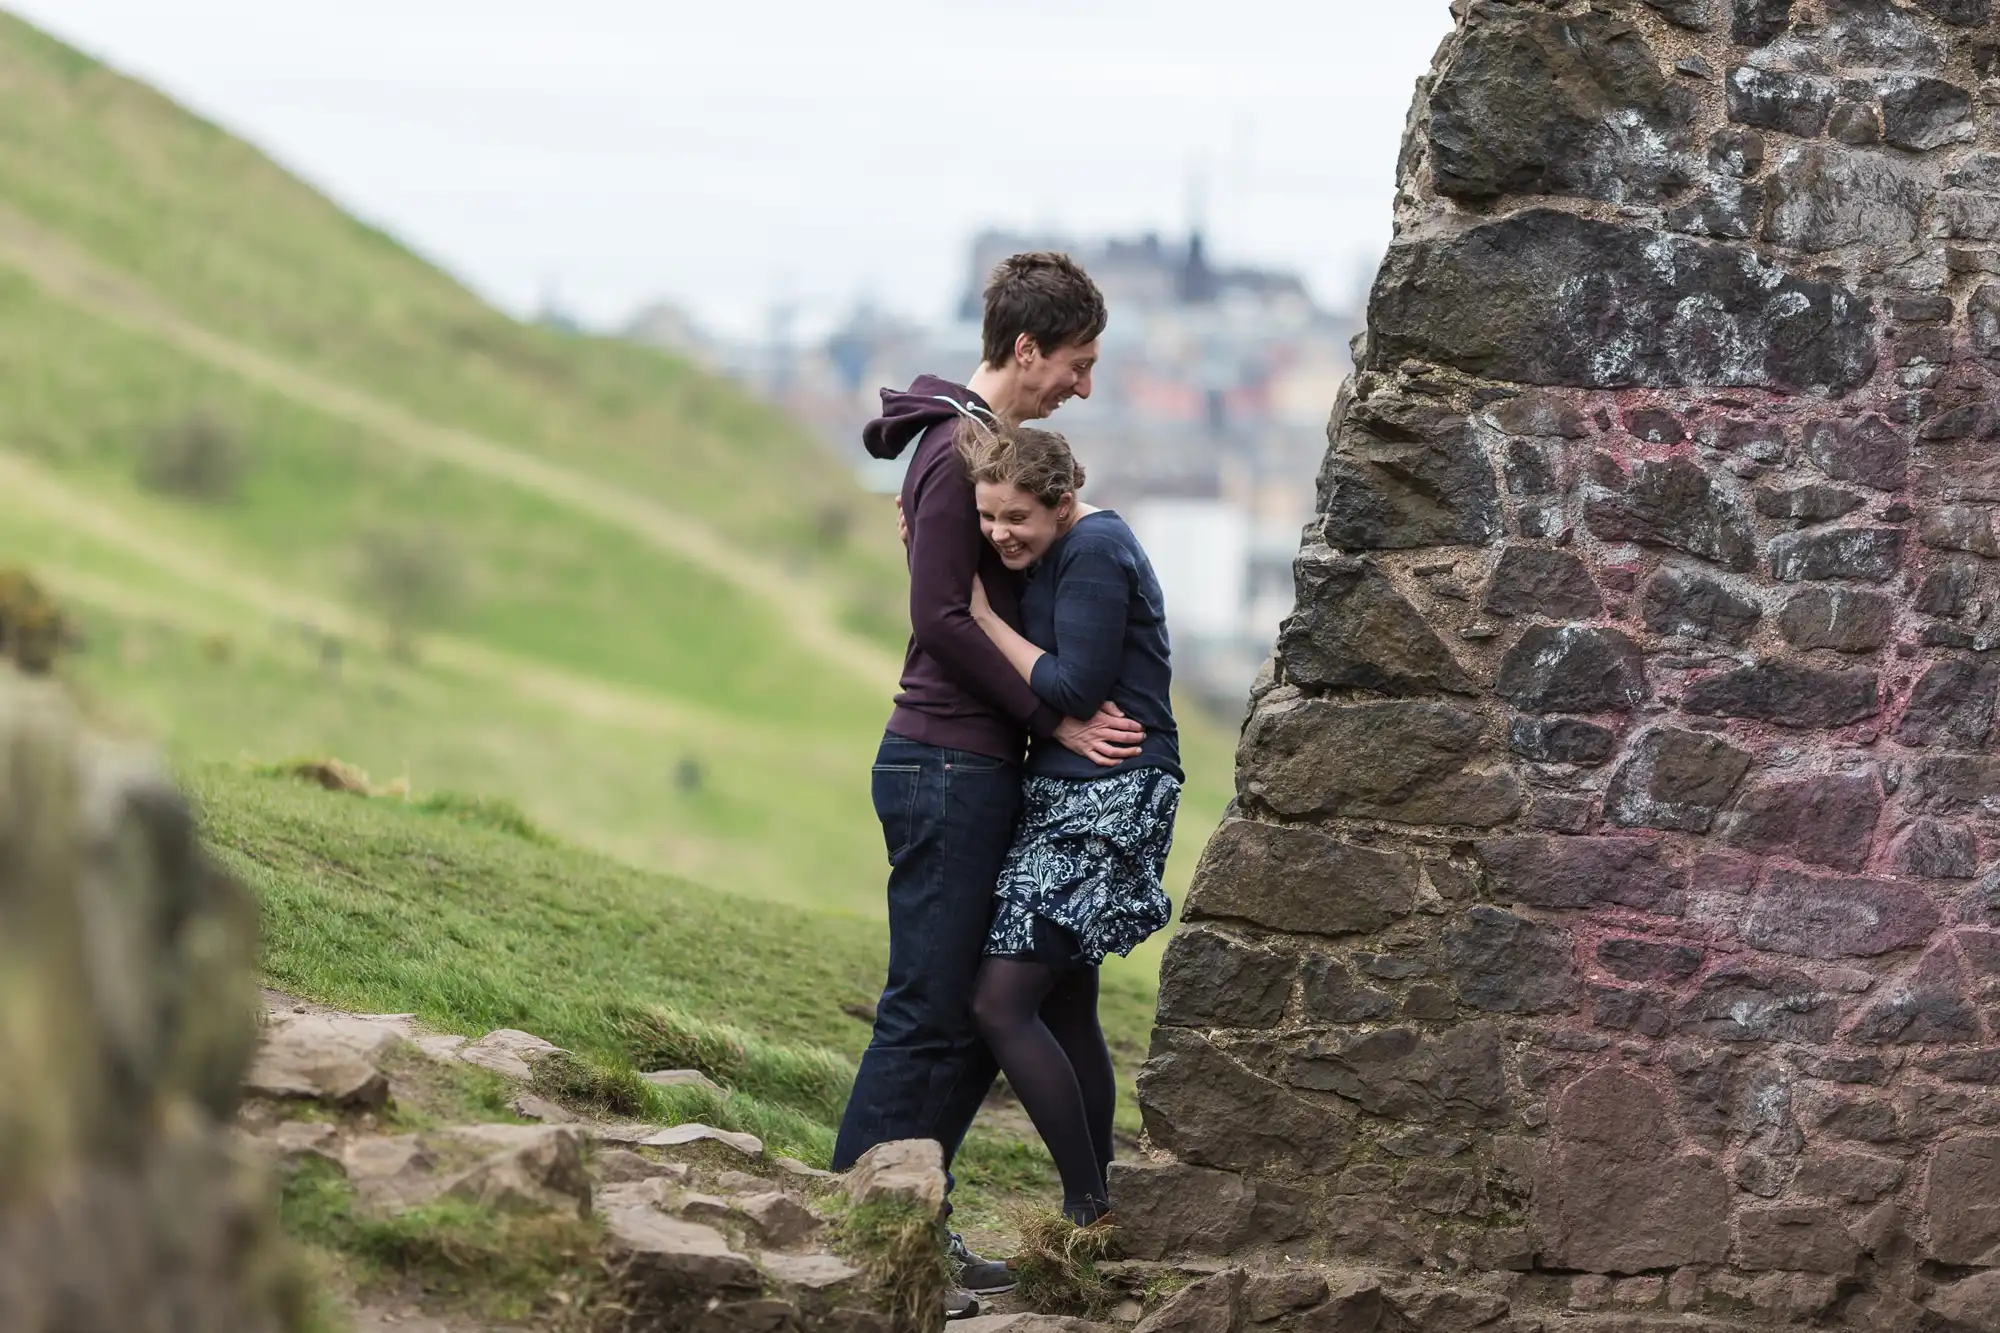 A couple embracing near a graffiti-covered stone wall with a grassy hill and cityscape in the background.